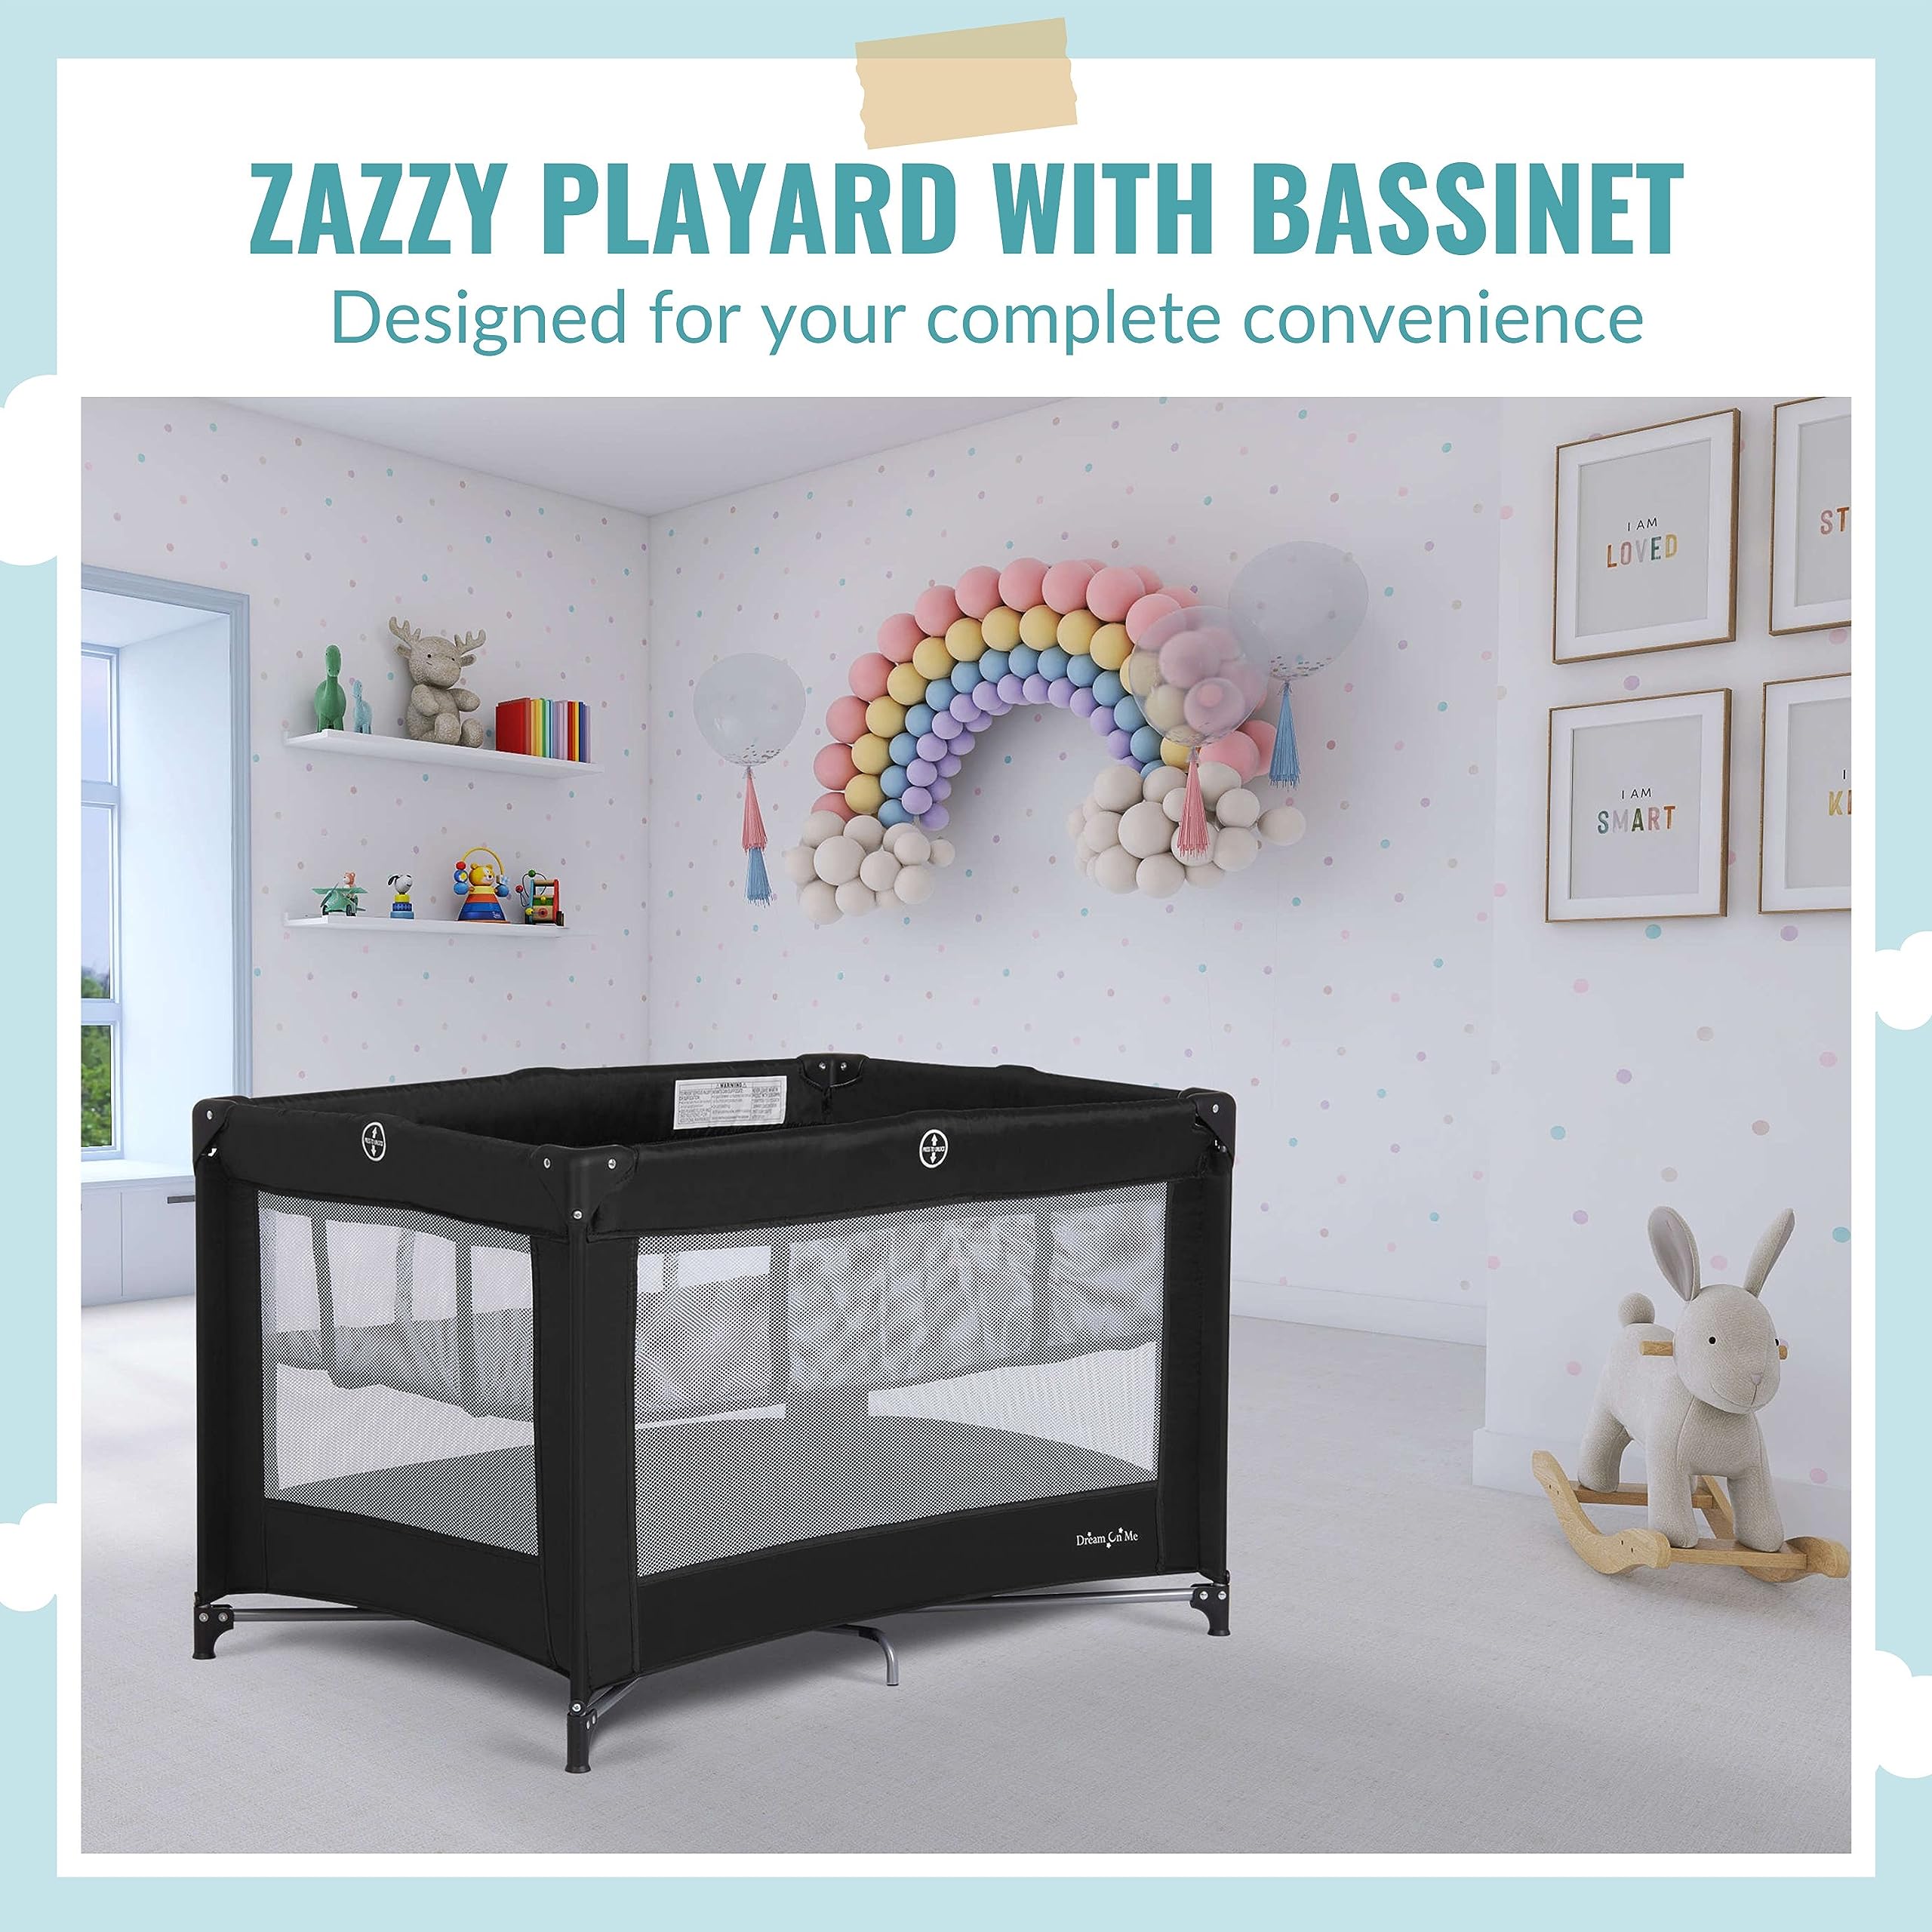 Dream On Me Zazzy Portable Playard with Bassinet in Black, Lightweight Packable and Easy Setup Baby Playard with Mattress and Travel Bag